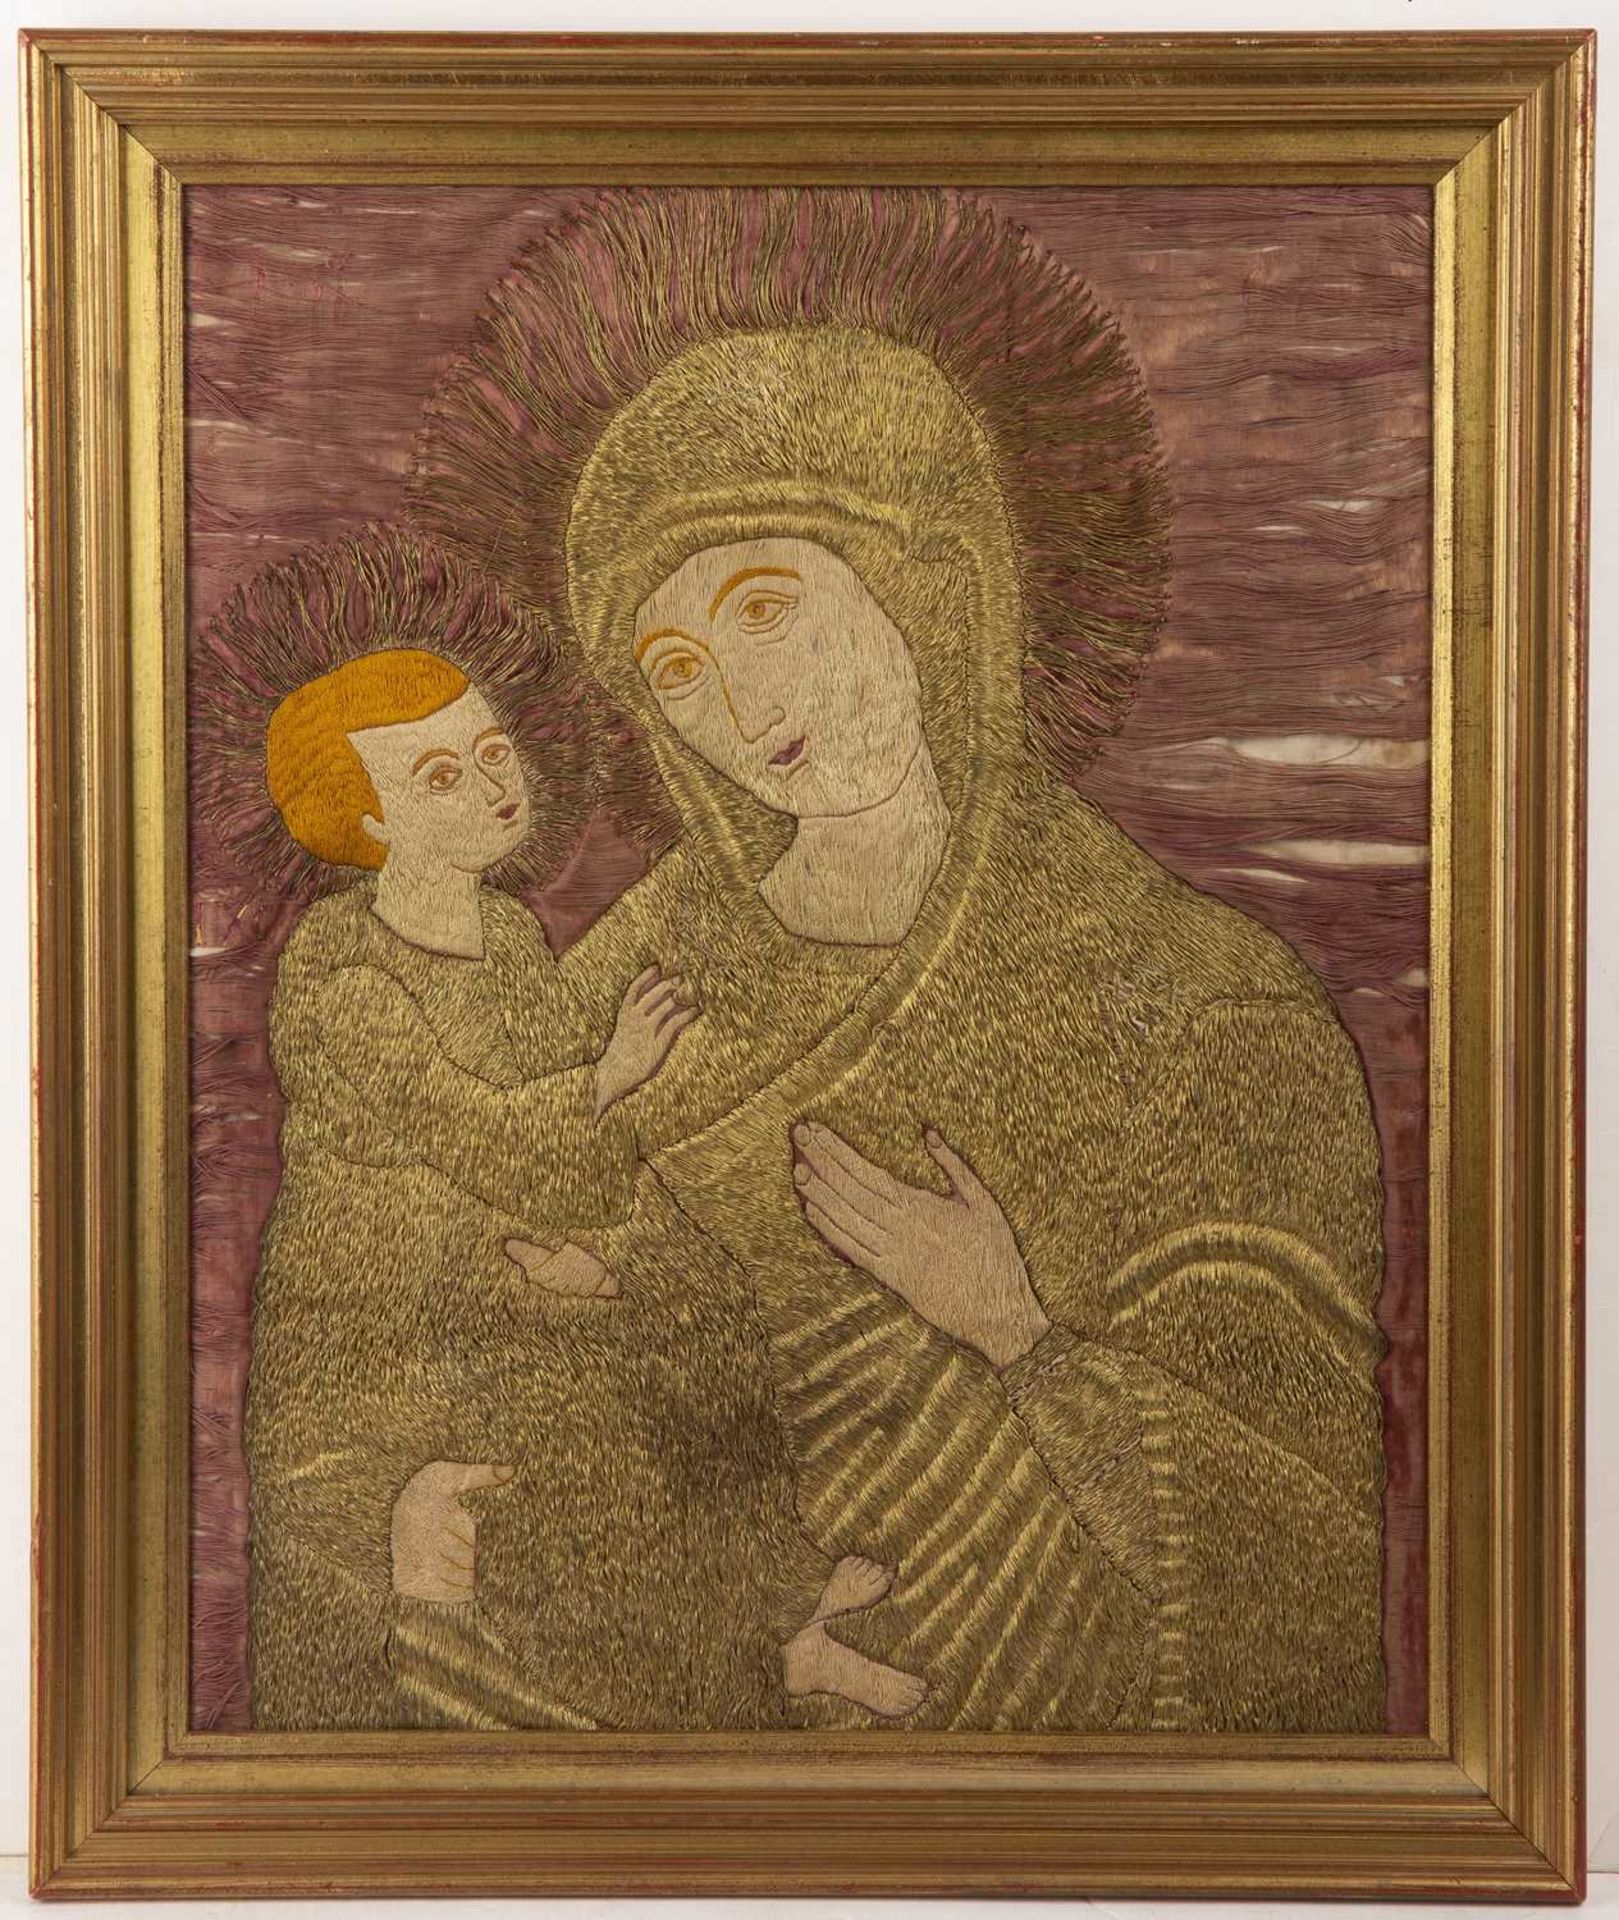 A 19th century or earlier European Madonna and child with bullion work on a manganese silk - Image 2 of 3